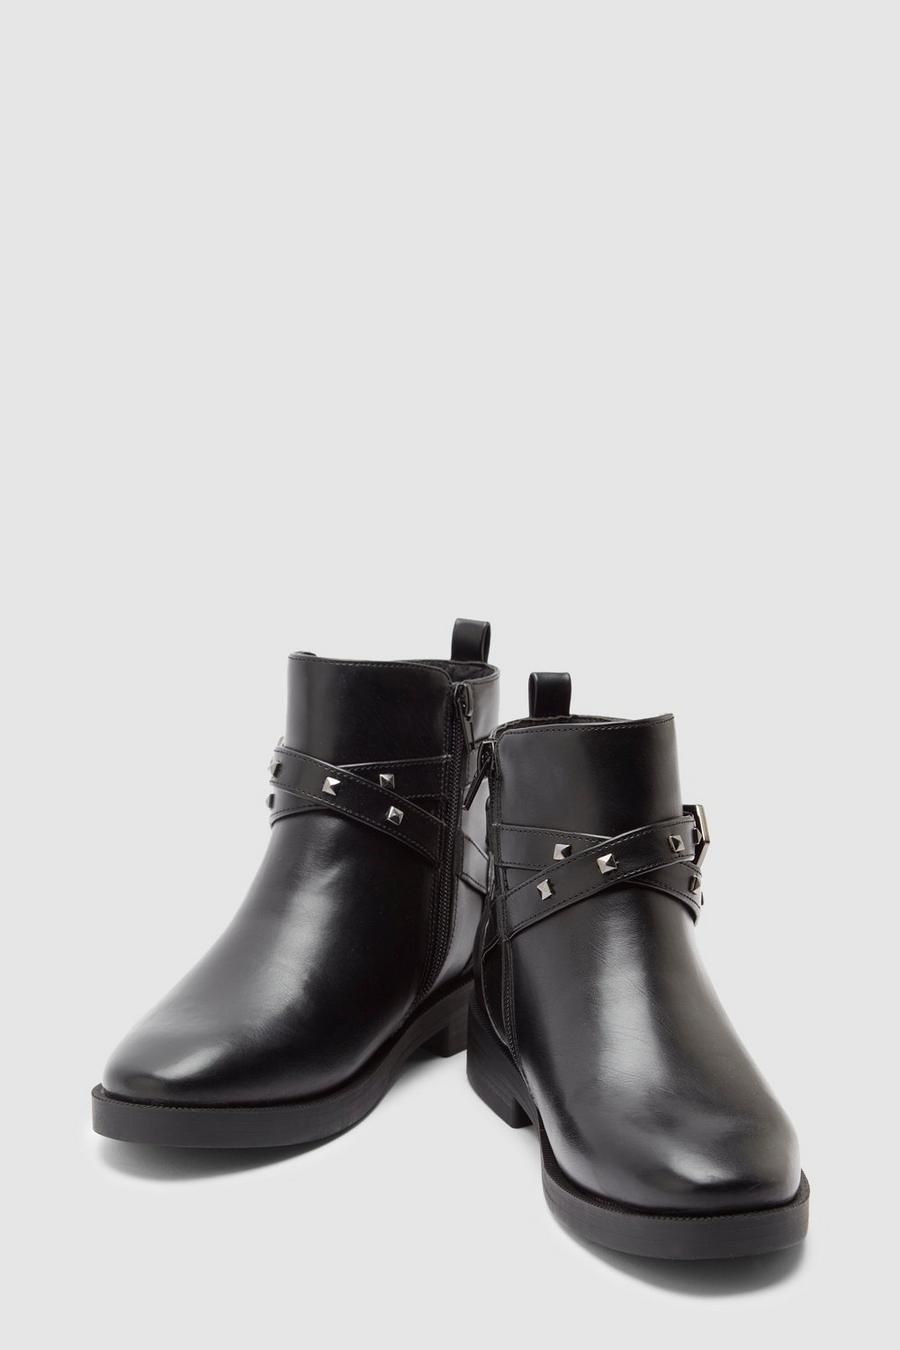 Good For The Sole: Wide Fit Maisie Comfort Ankle Boots